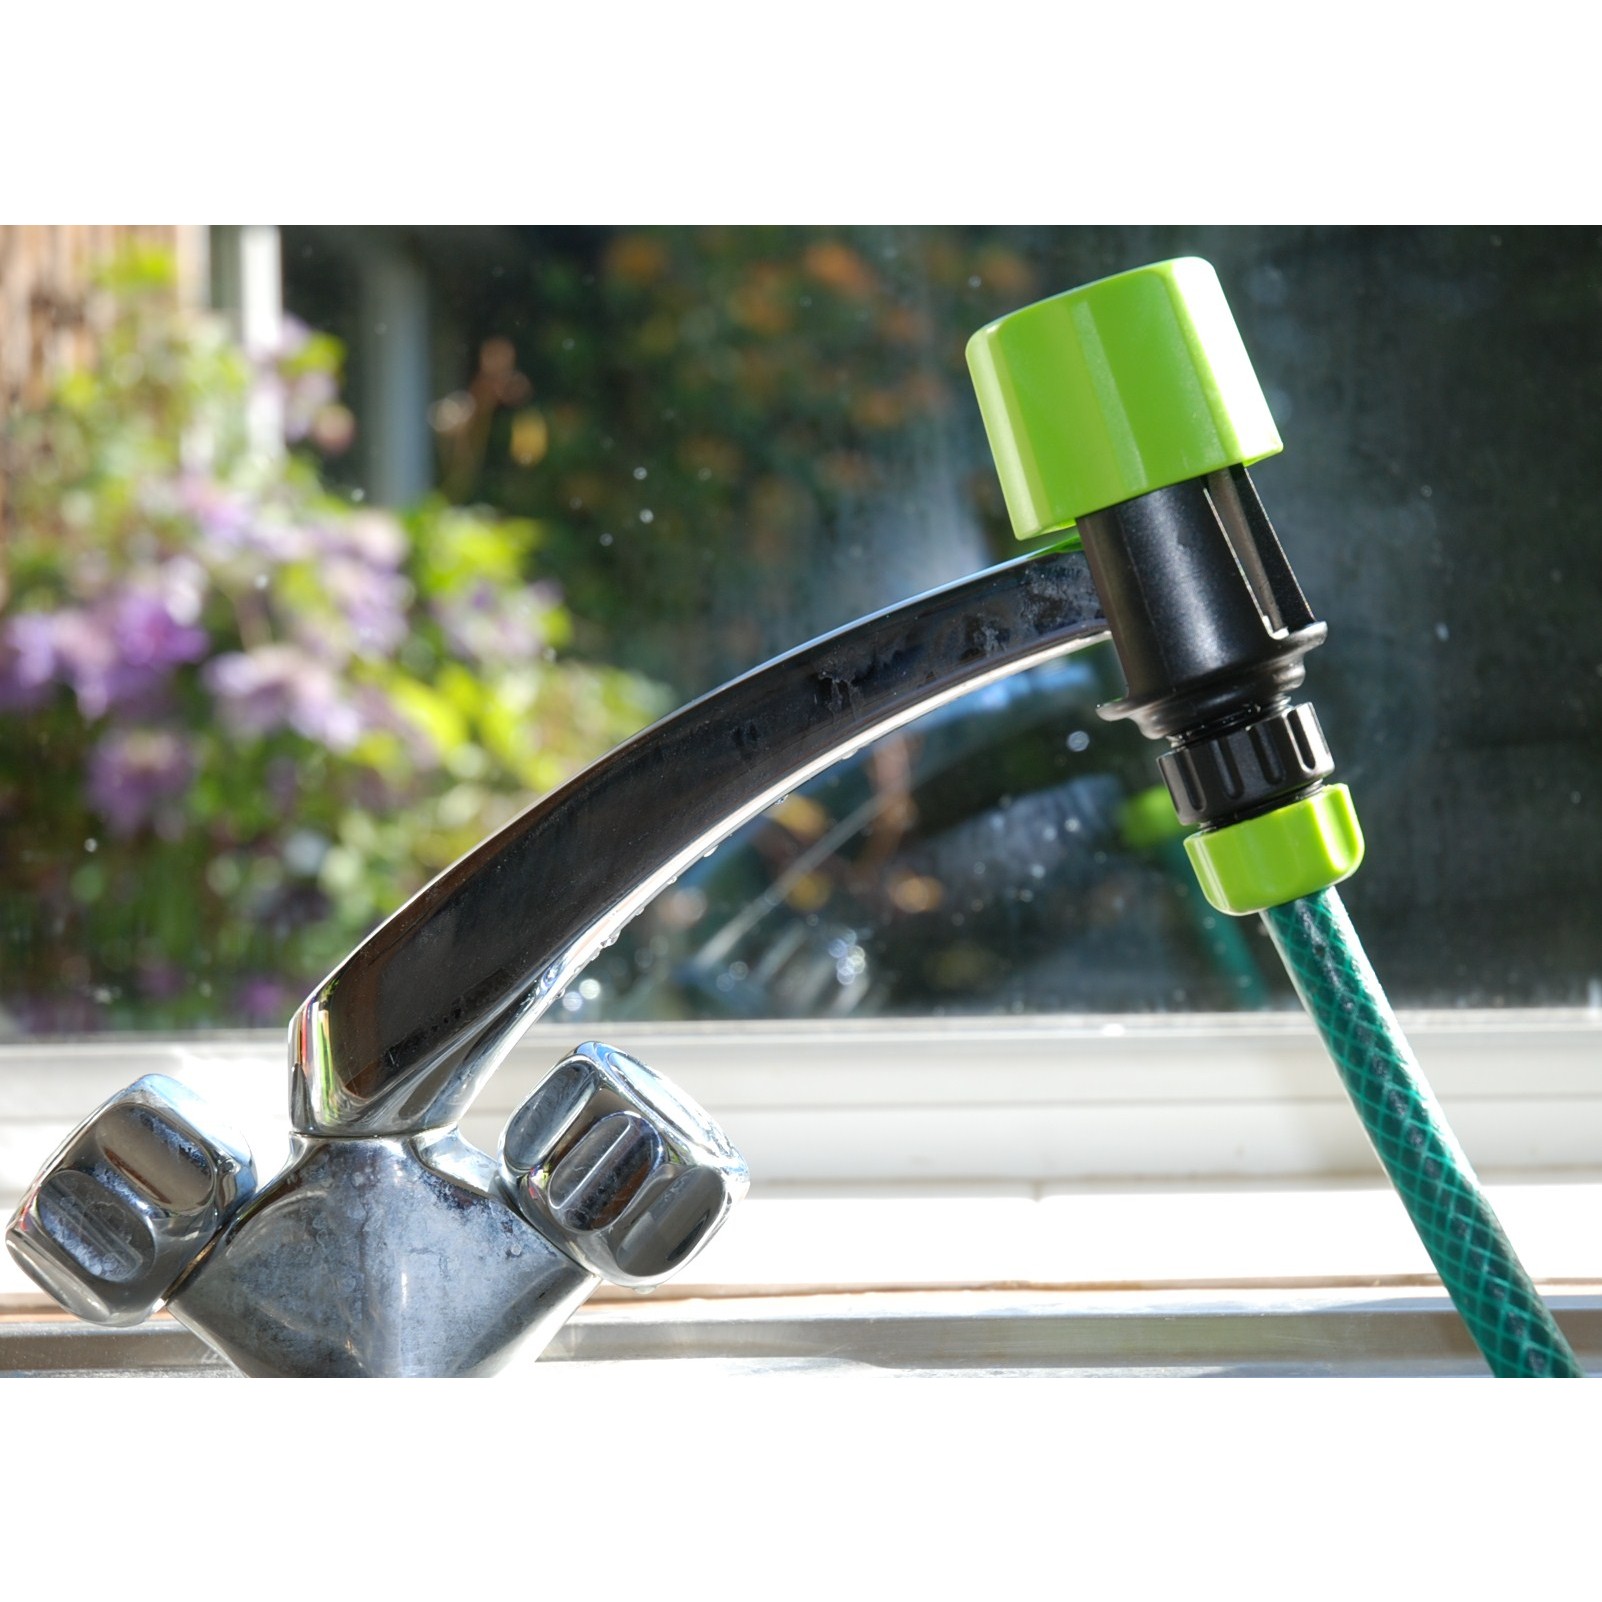 Toolzone Kitchen Mixer Tap Hose Connector, Toolzone Gd156 Indoor Kitchen Mixer Tap Garden Hose Pipe Connector